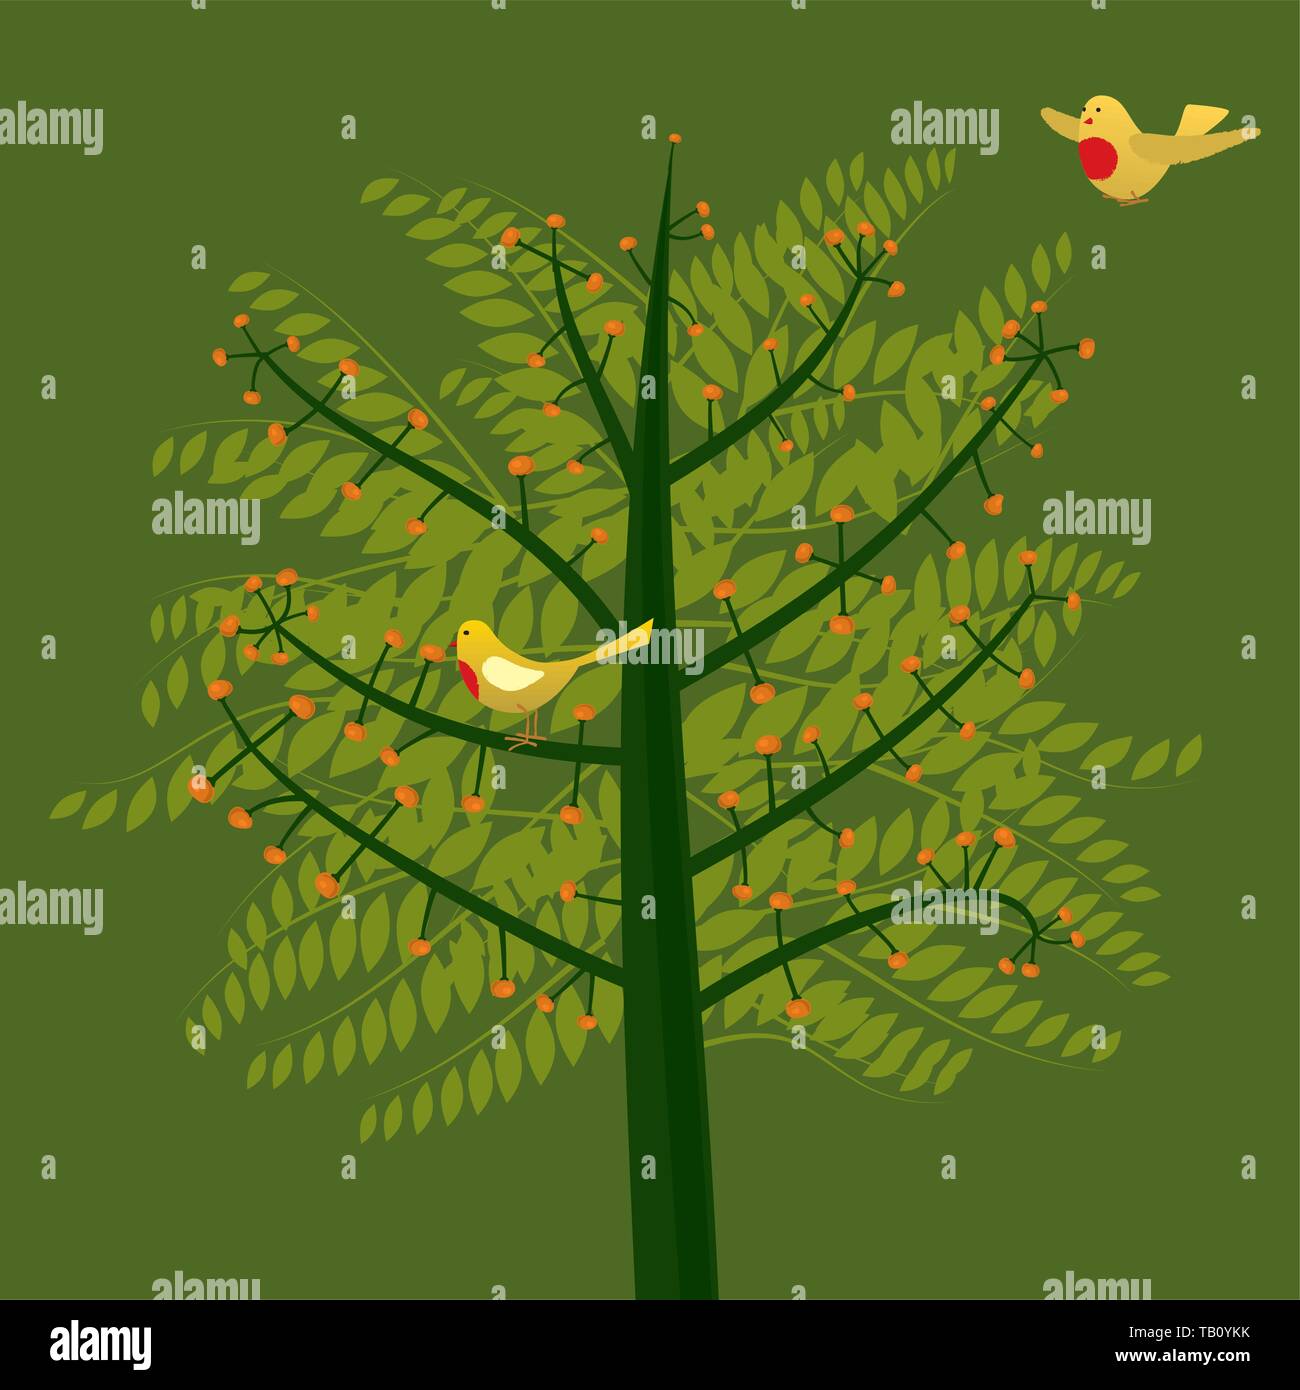 Vector illustration. Two birds on a summer tree. Green background. Stock Vector